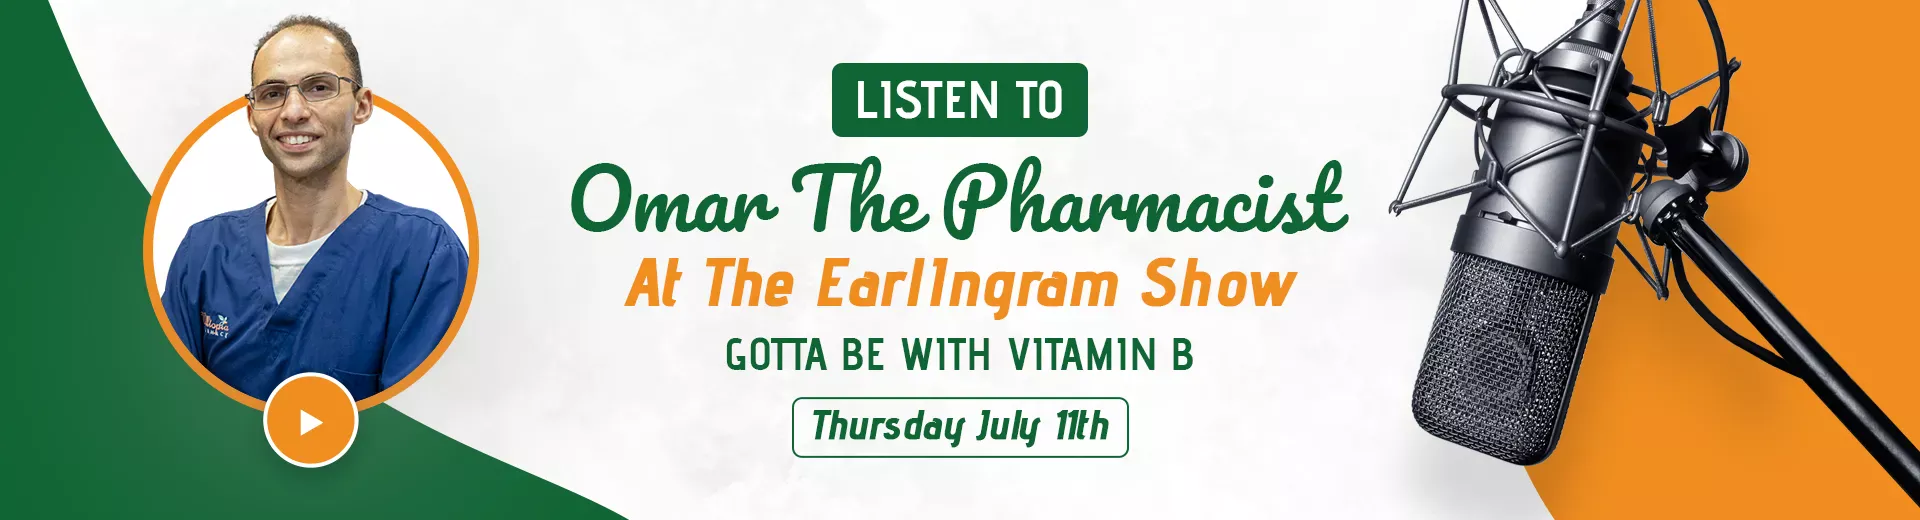 Listen to Omar the Pharmacist at The Earl Ingram Show: Gotta Be with Vitamin B